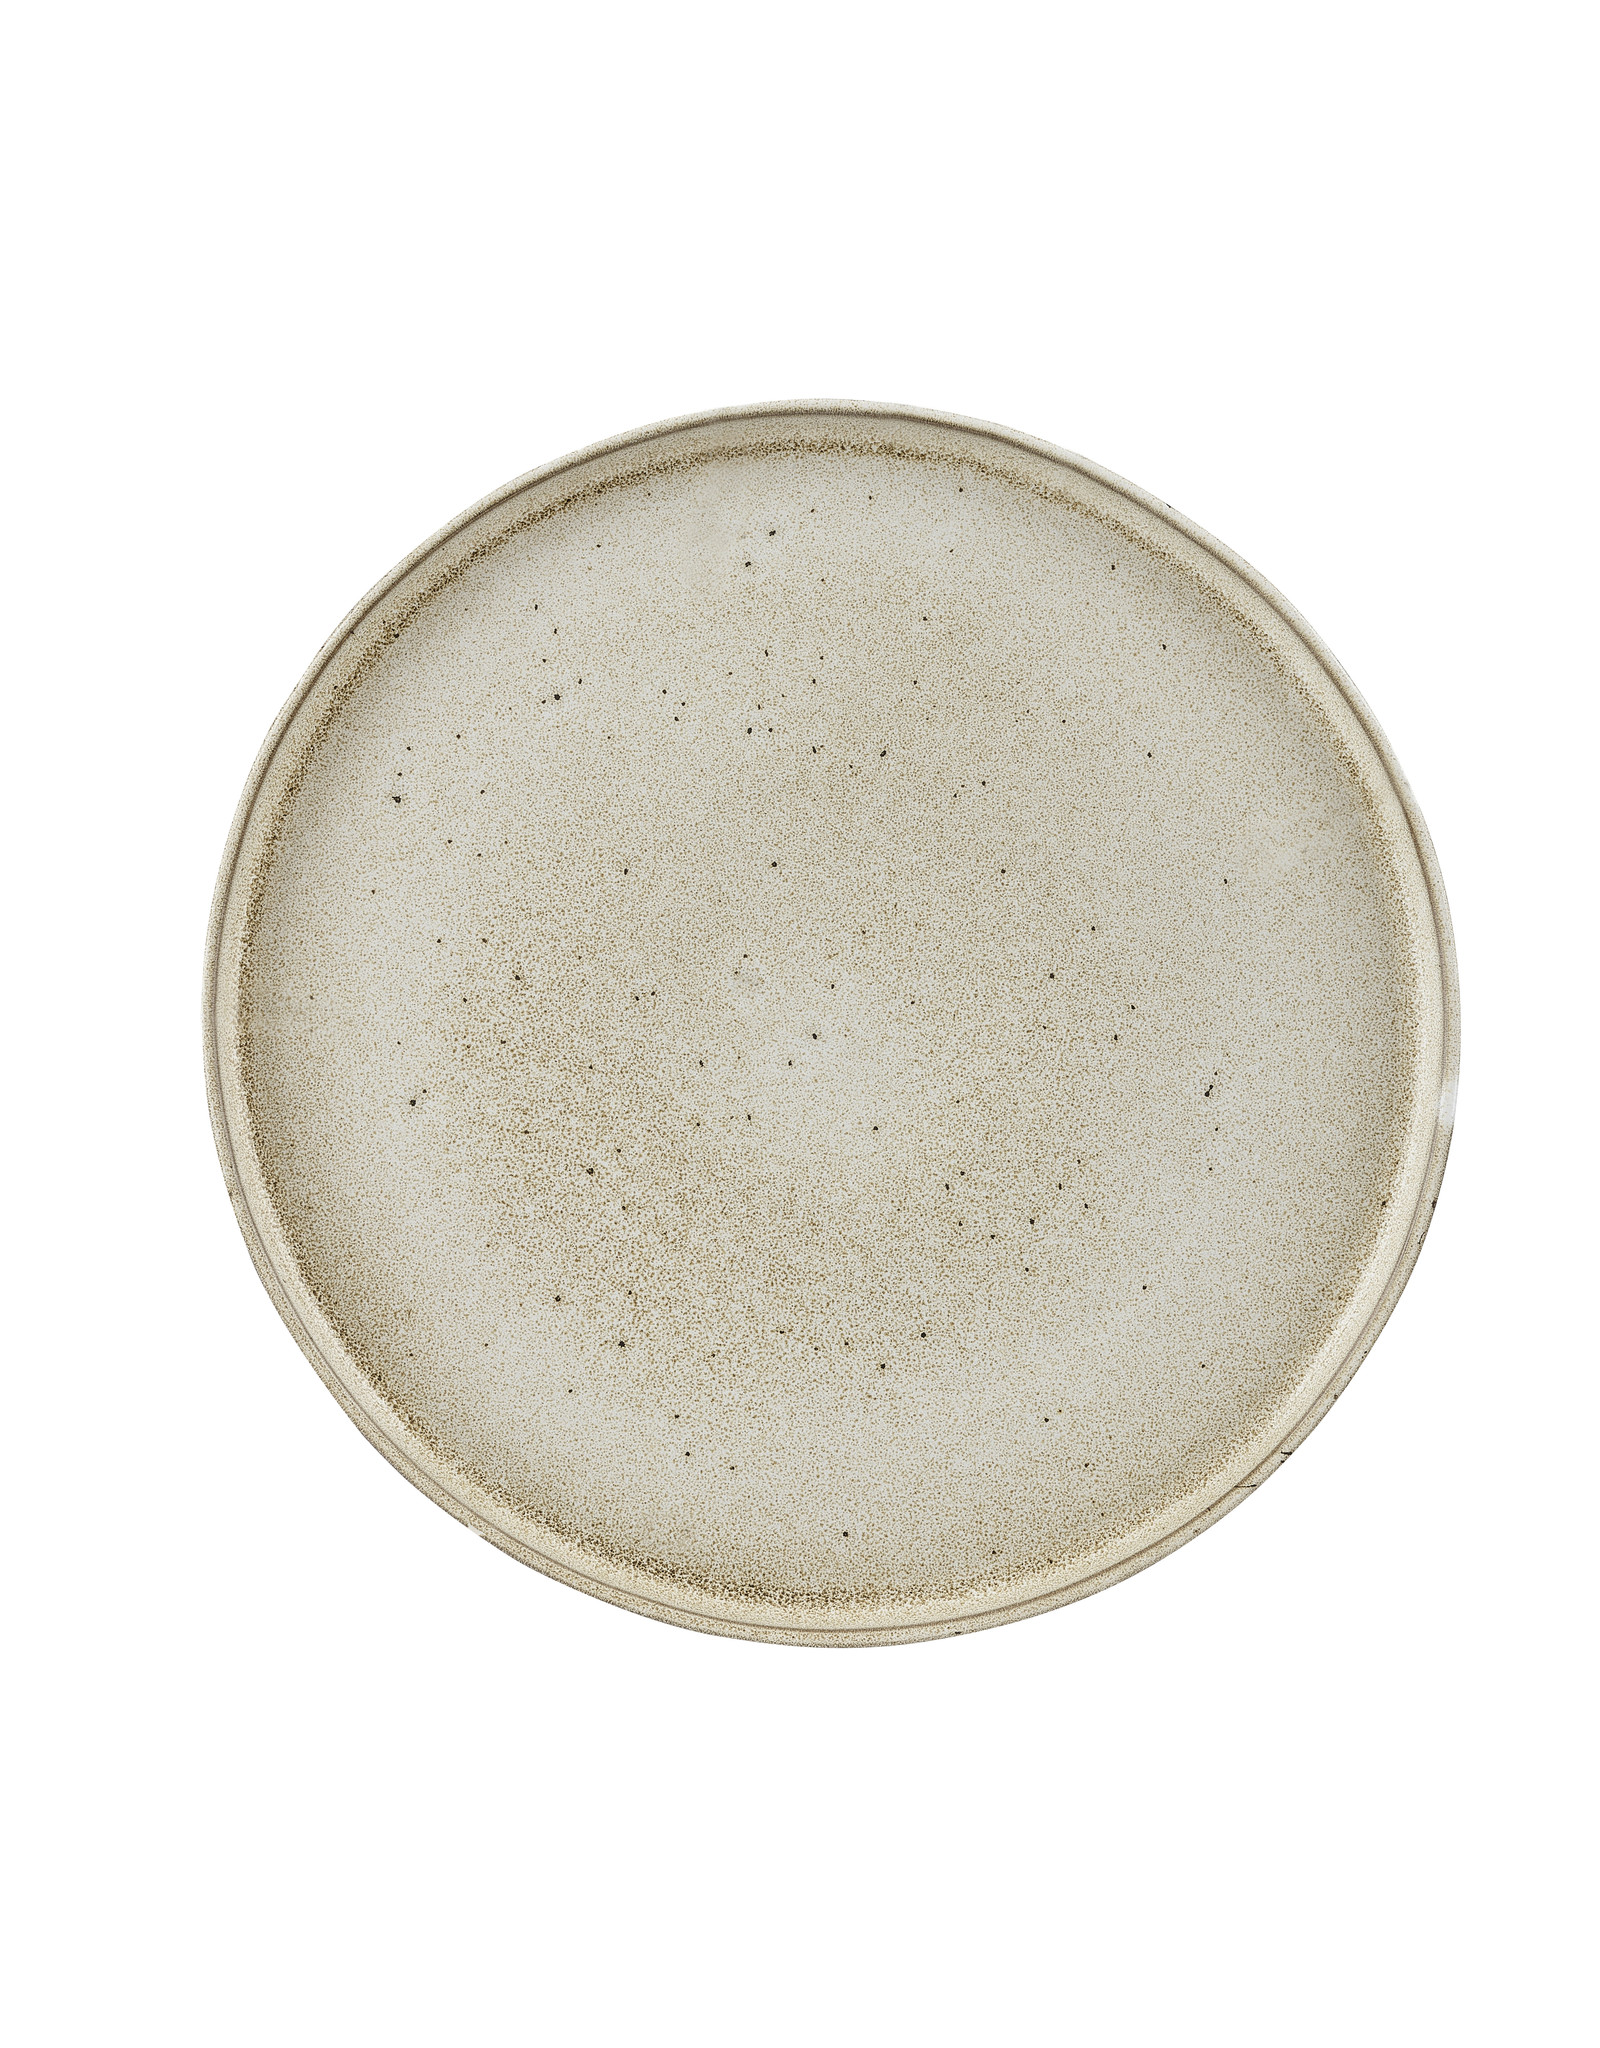 Stylepoint Stonewhite bord met opstaande rand 26,5 cm